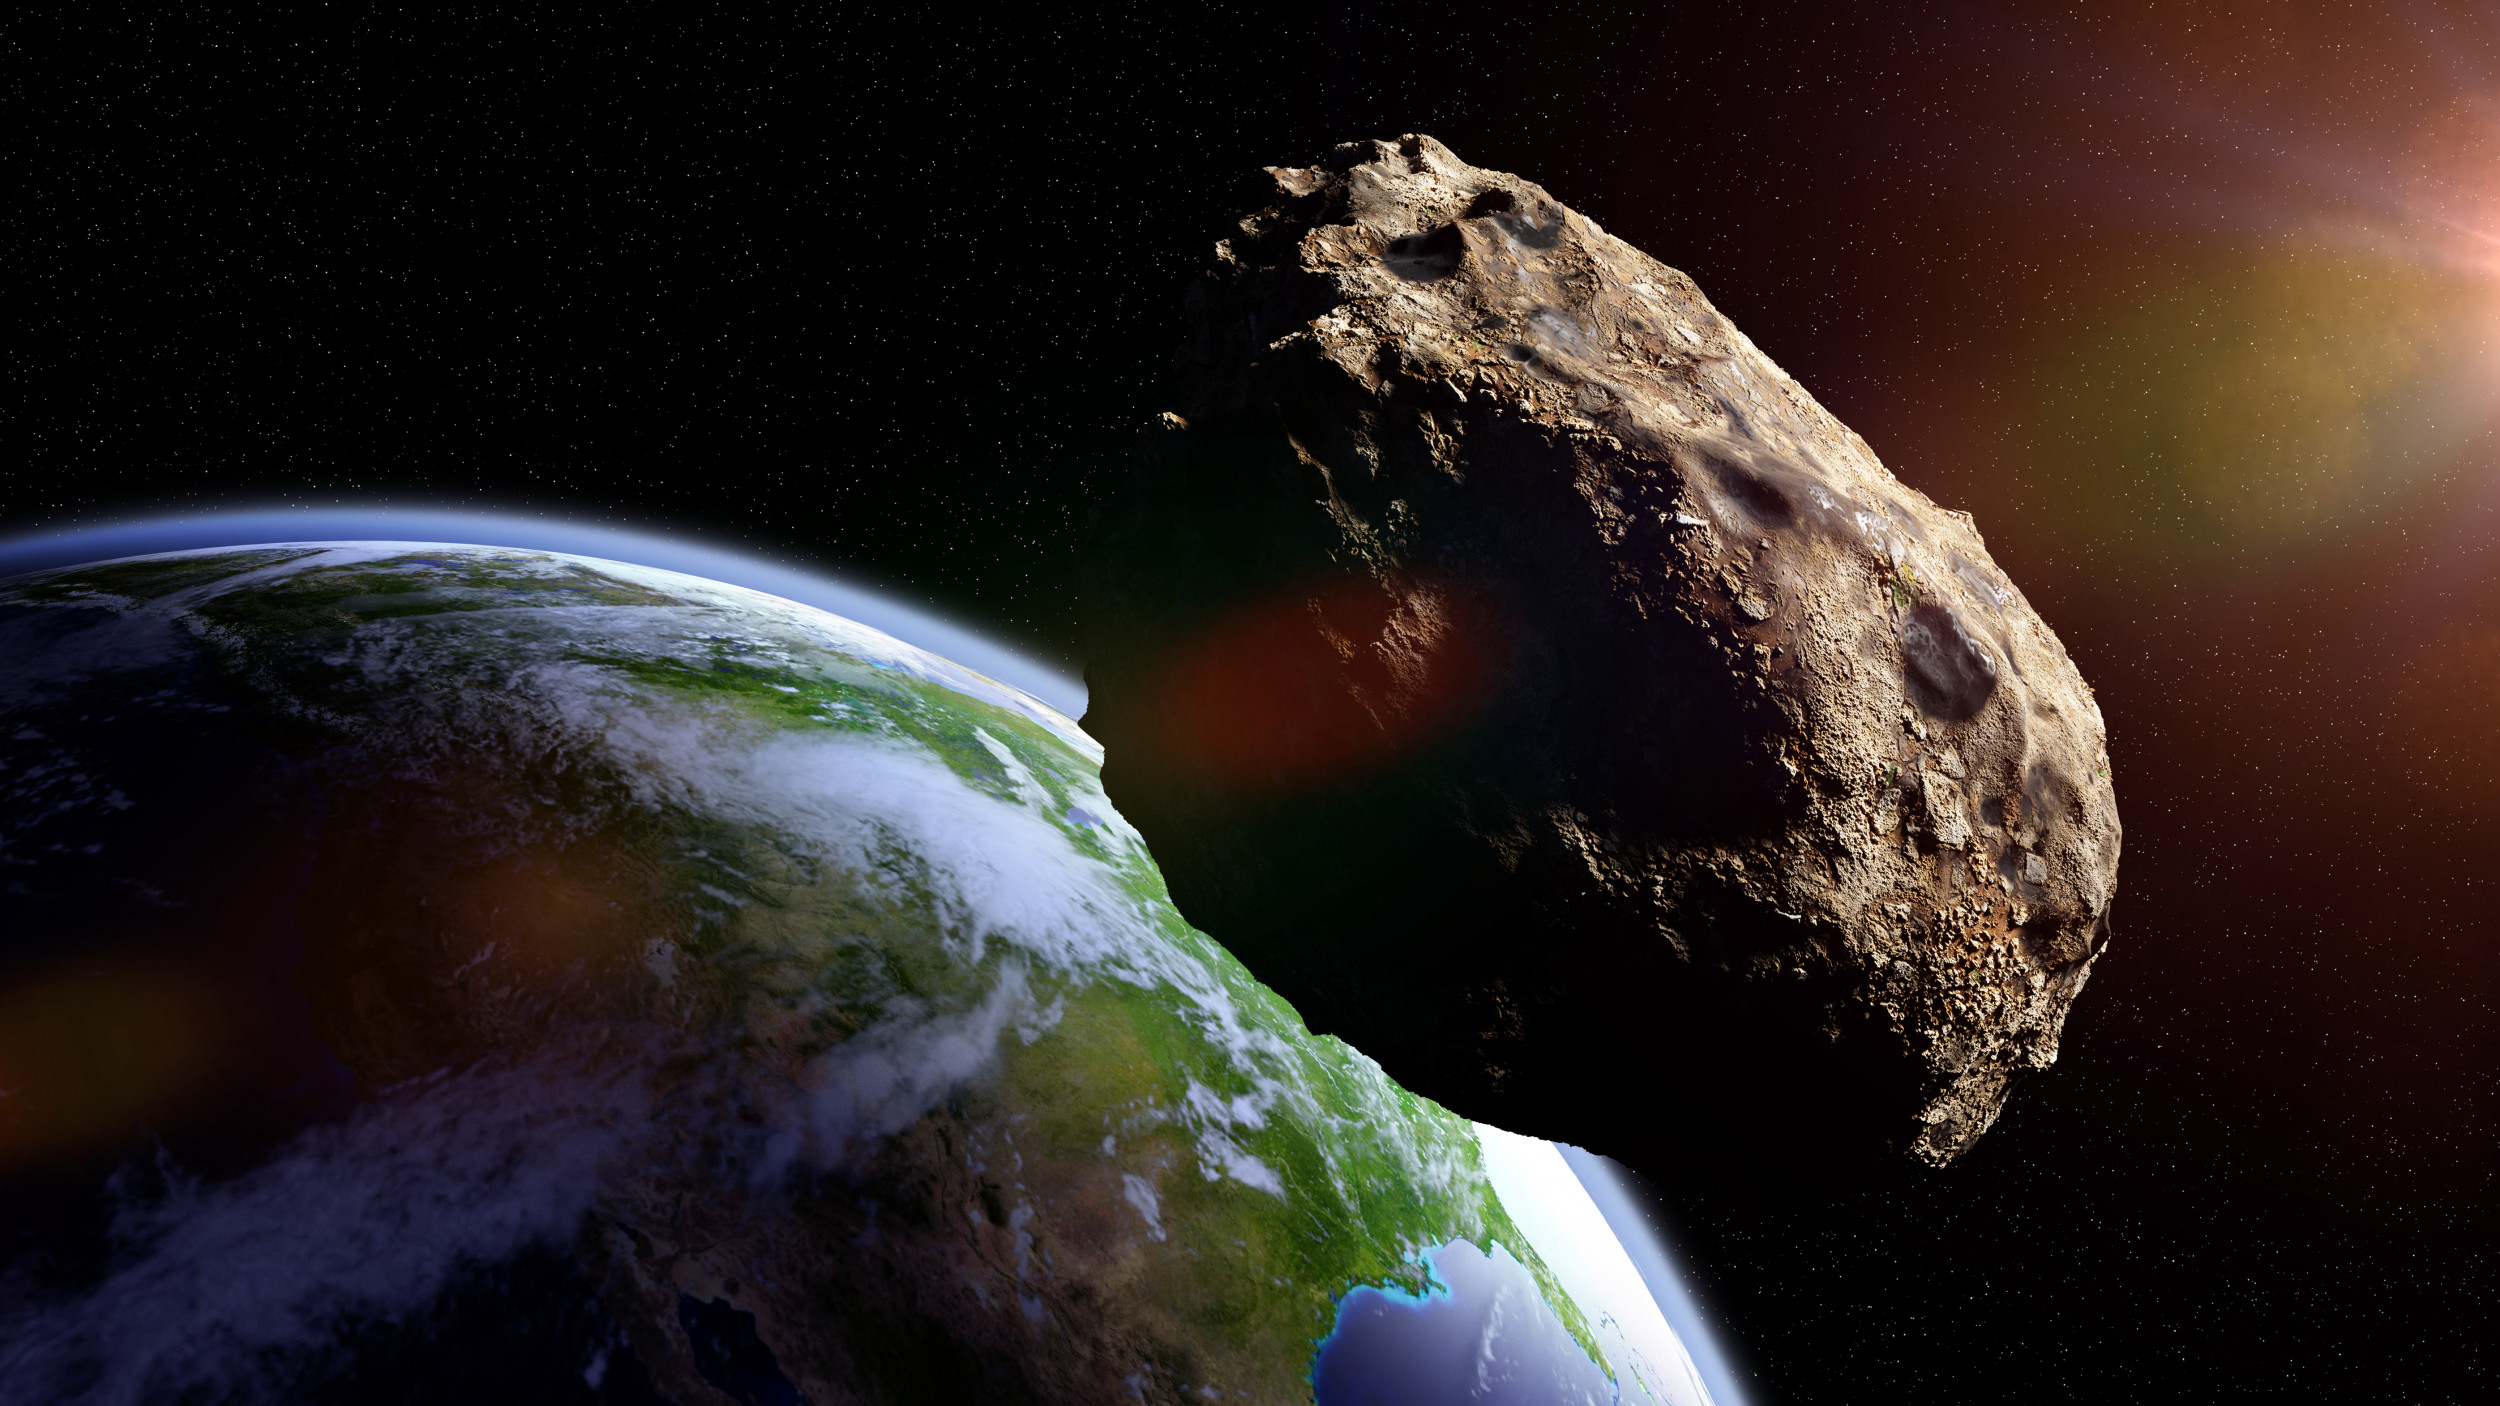 Enormous Asteroid Twice The Size of The Empire State Building To Pass Earth Next Week